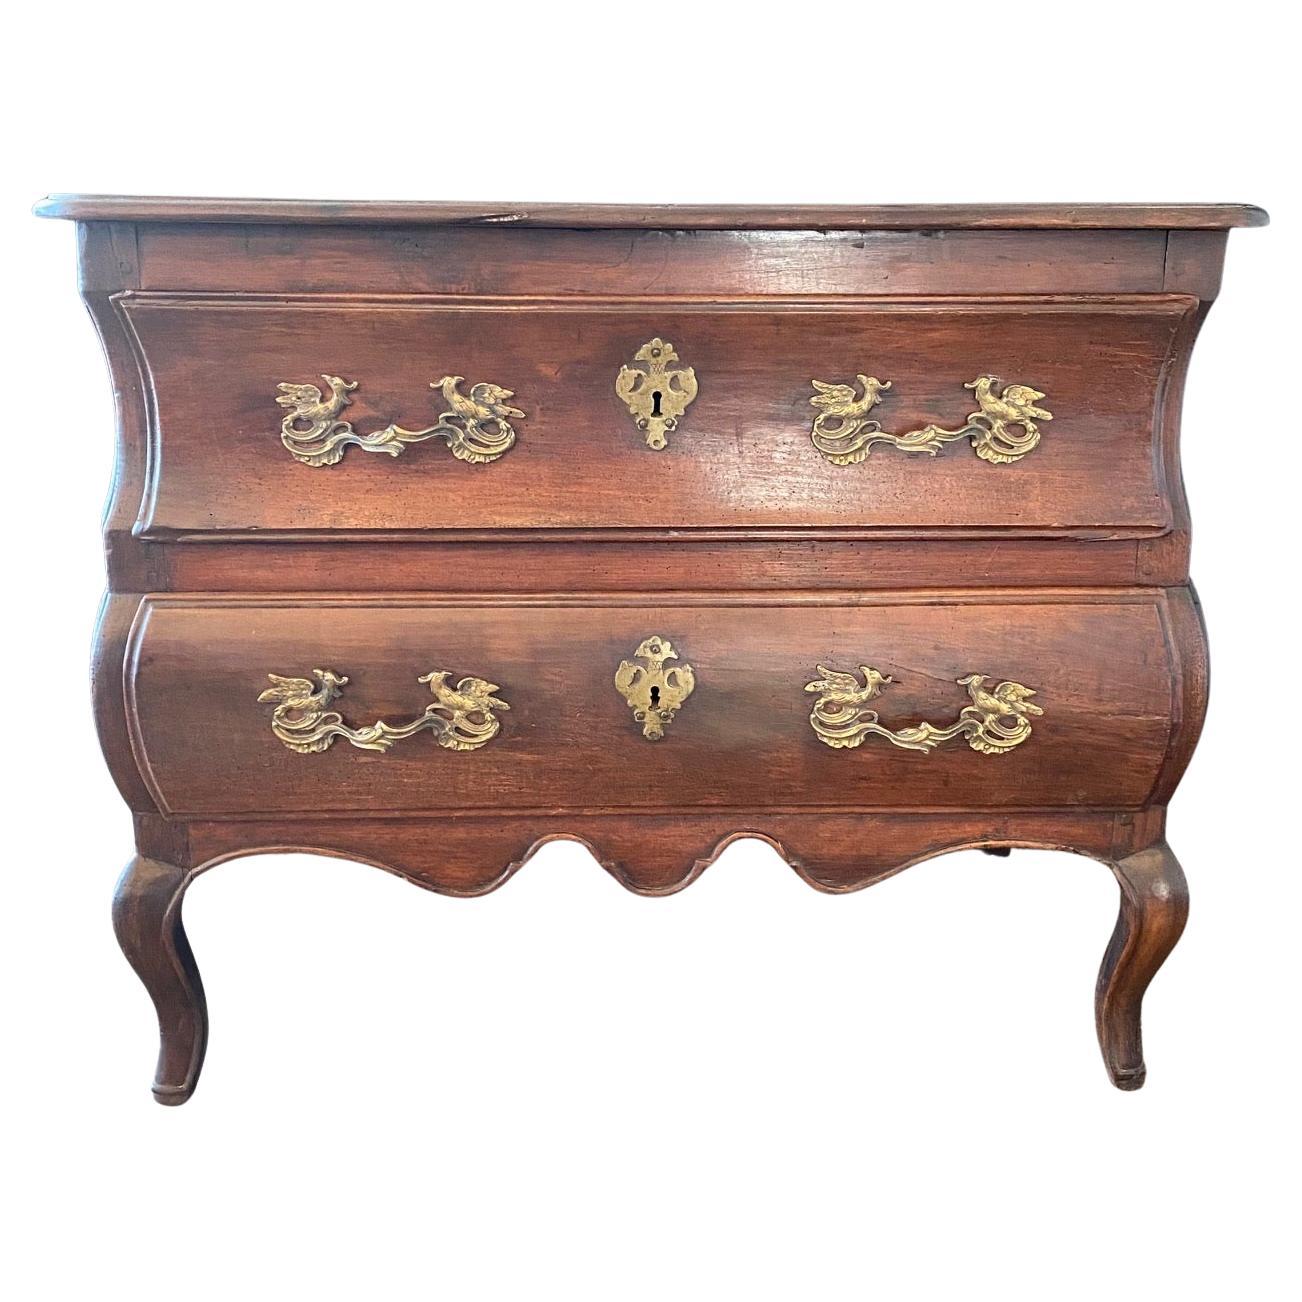  18th Century French Louis XV Commode or Chest of Drawers  For Sale